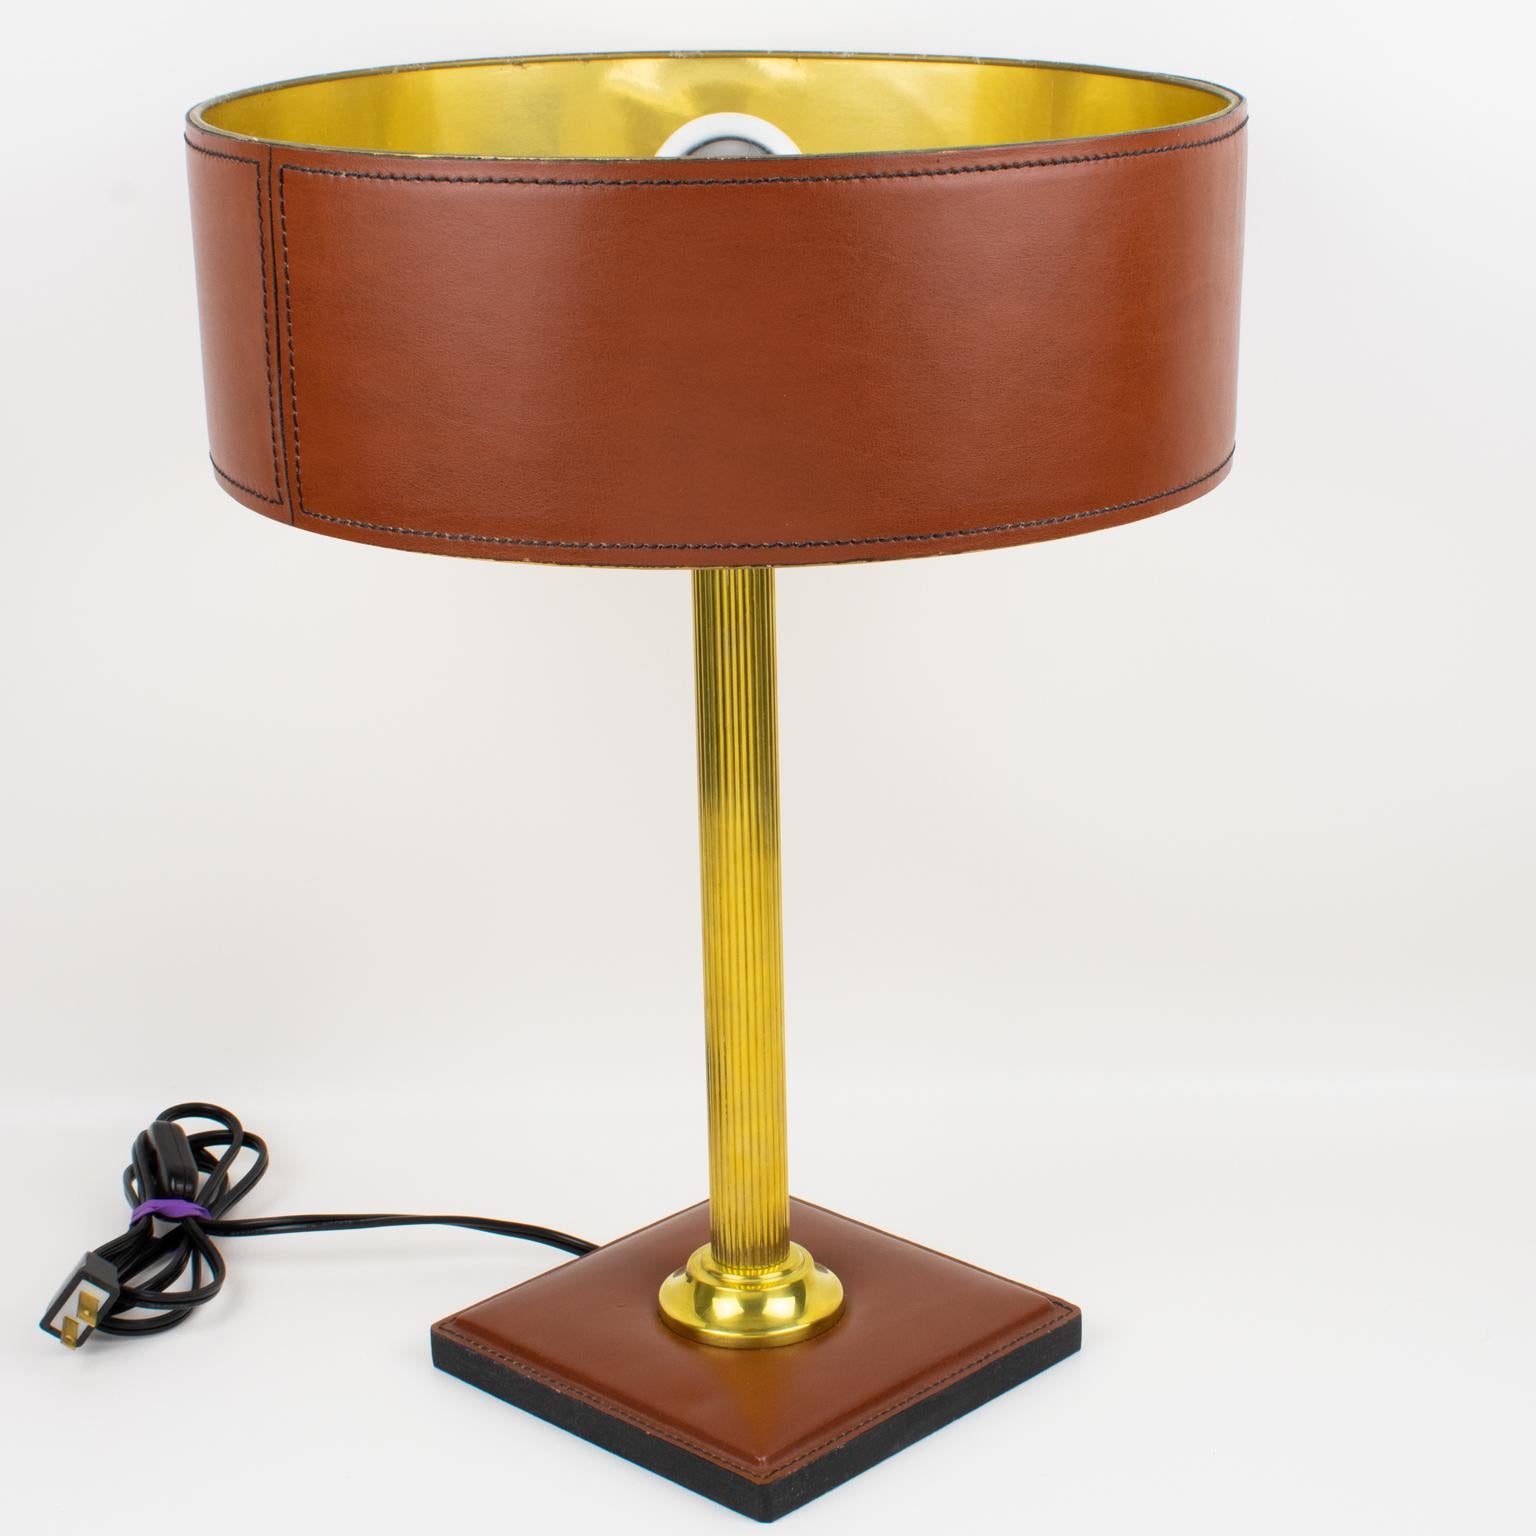 This elegant table lamp was designed by Jacques Adnet (1901 - 1984). The classical cinnamon brown color lamp features a hand-stitched shade with gilded paper lining, polished brass reeded column stem, and a square base in the same hand-stitched